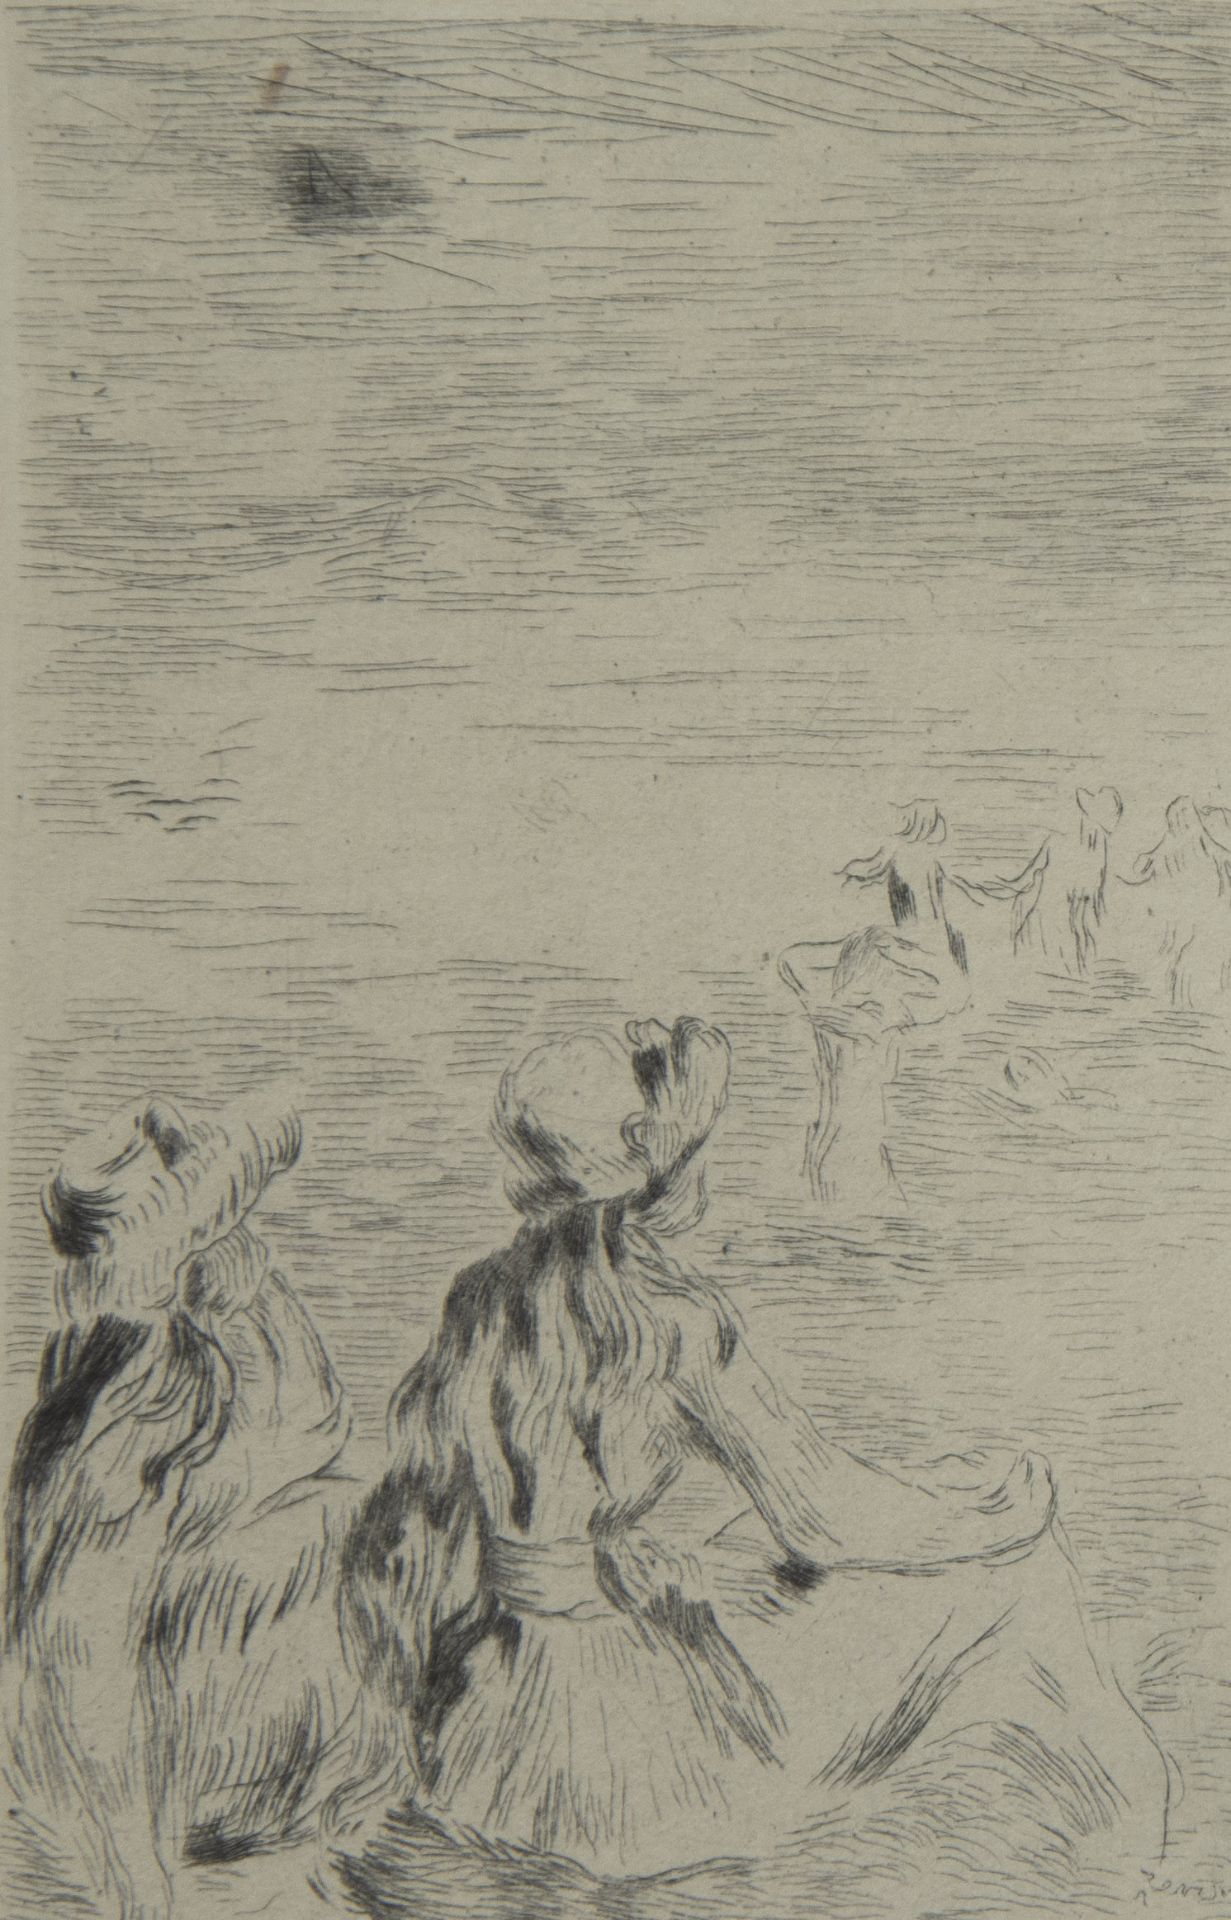 Etching On the beach, signed in the plate Renoir